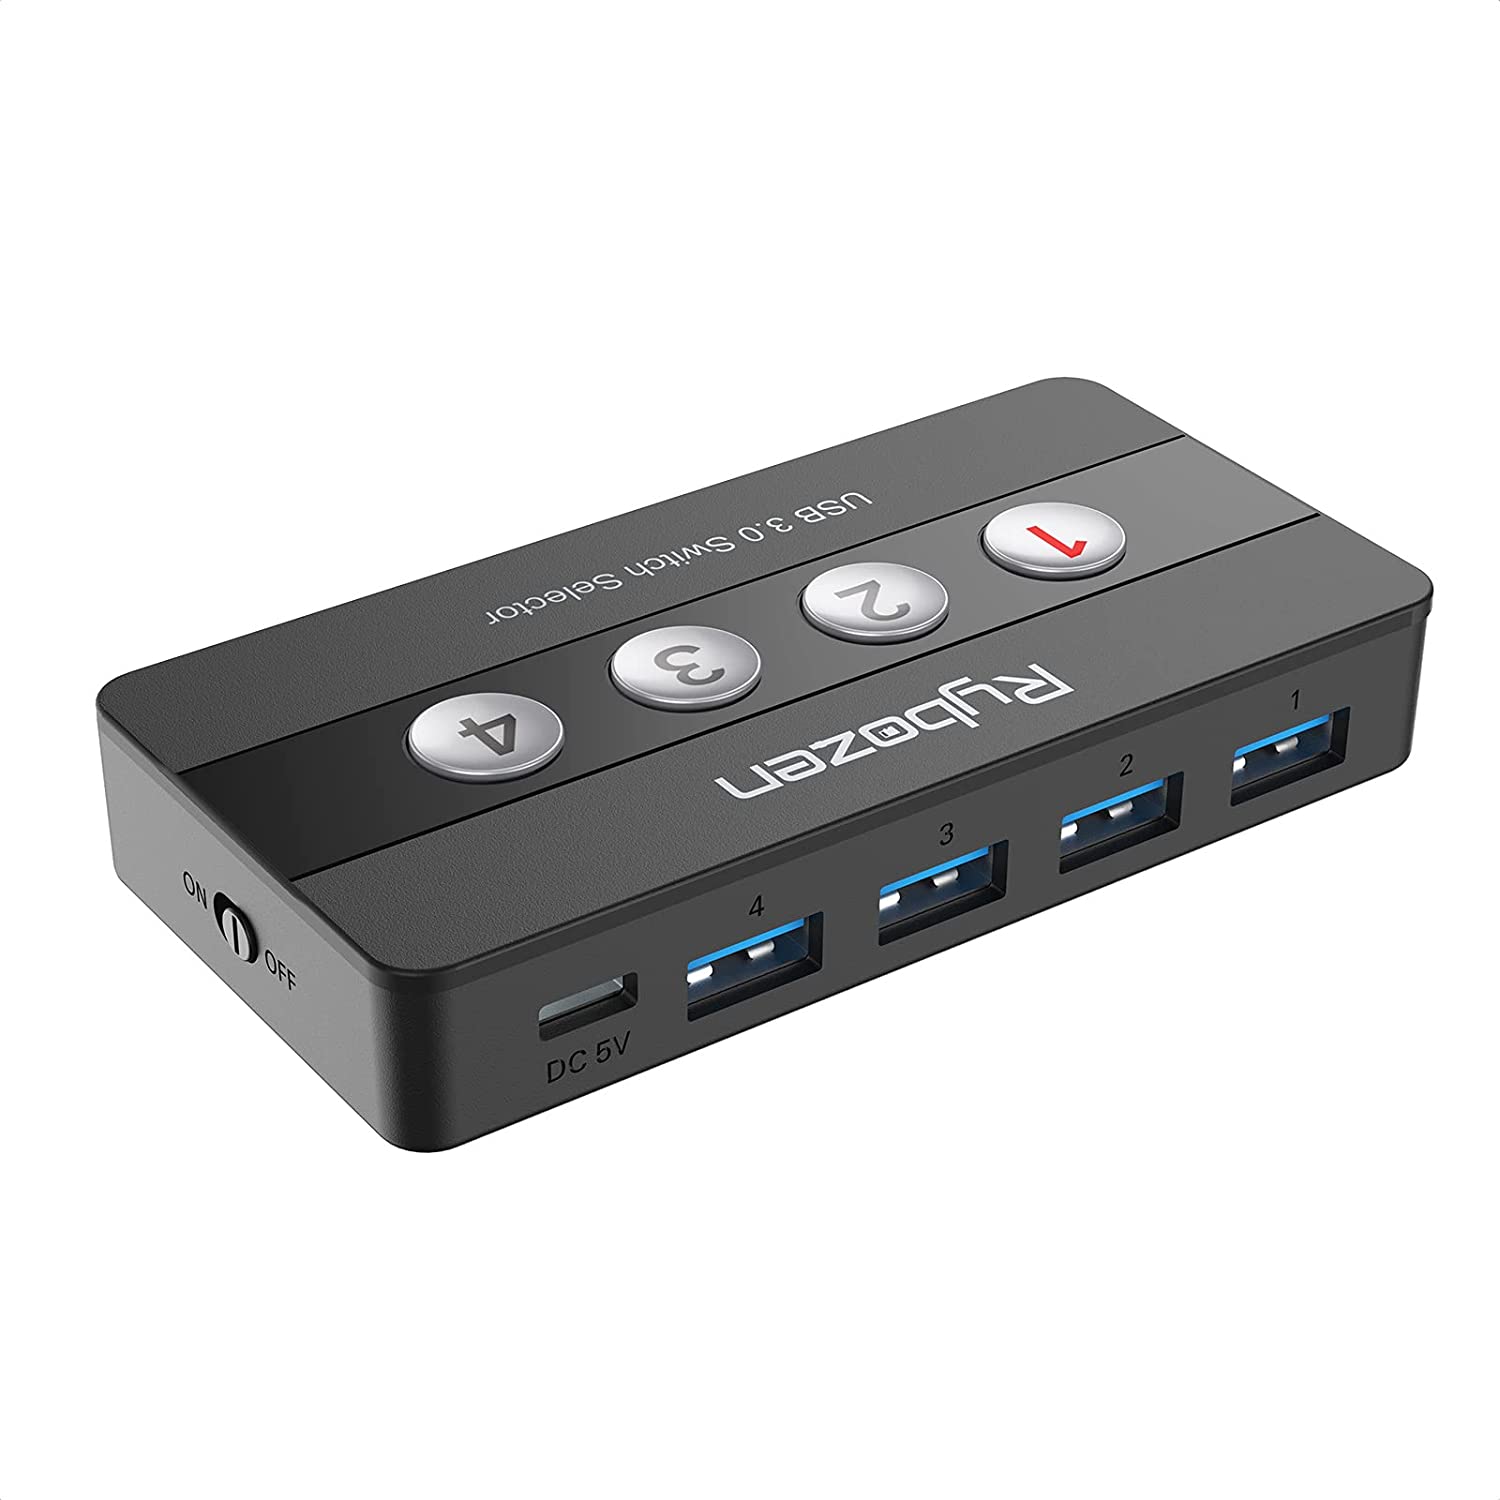 USB 3.0 Switch, Rybozen USB KVM Switch for 2 Computer Sharing 4 USB  Devices, 2 in 4 out USB Switcher for Mouse Keyboard Scanner Printer, USB  Sharing